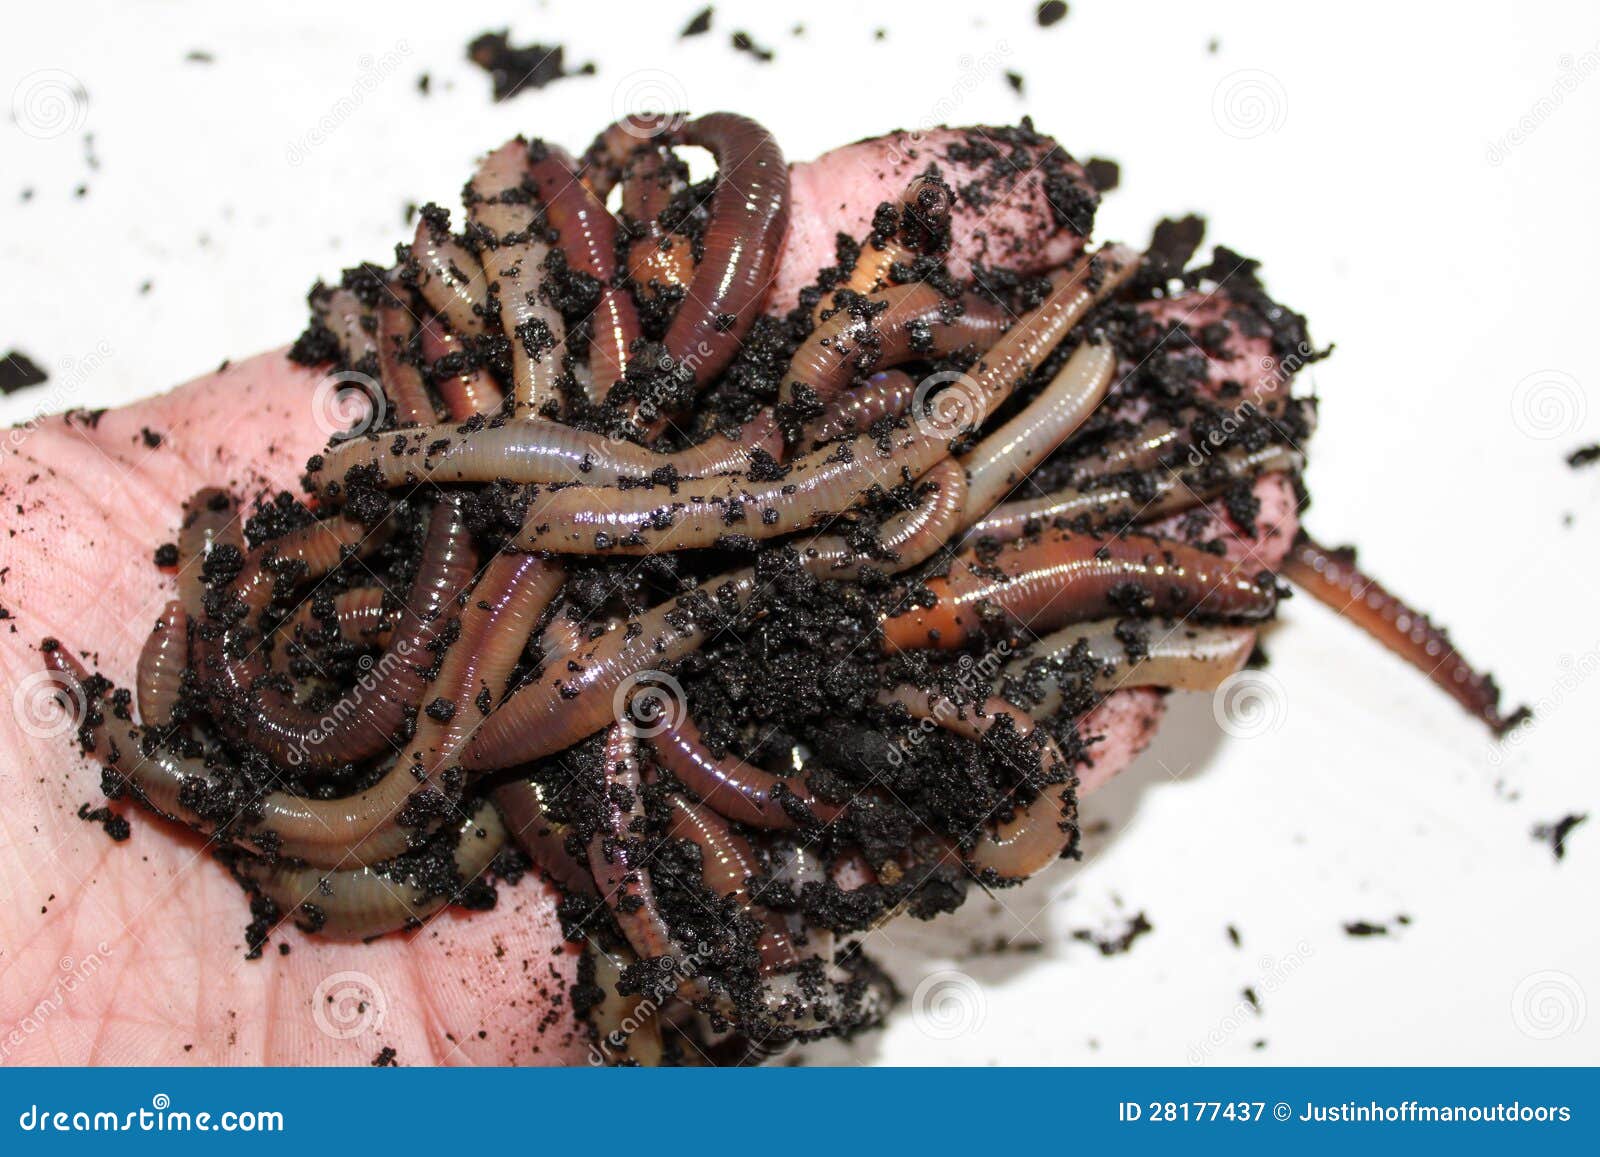 night crawler worms in open hand